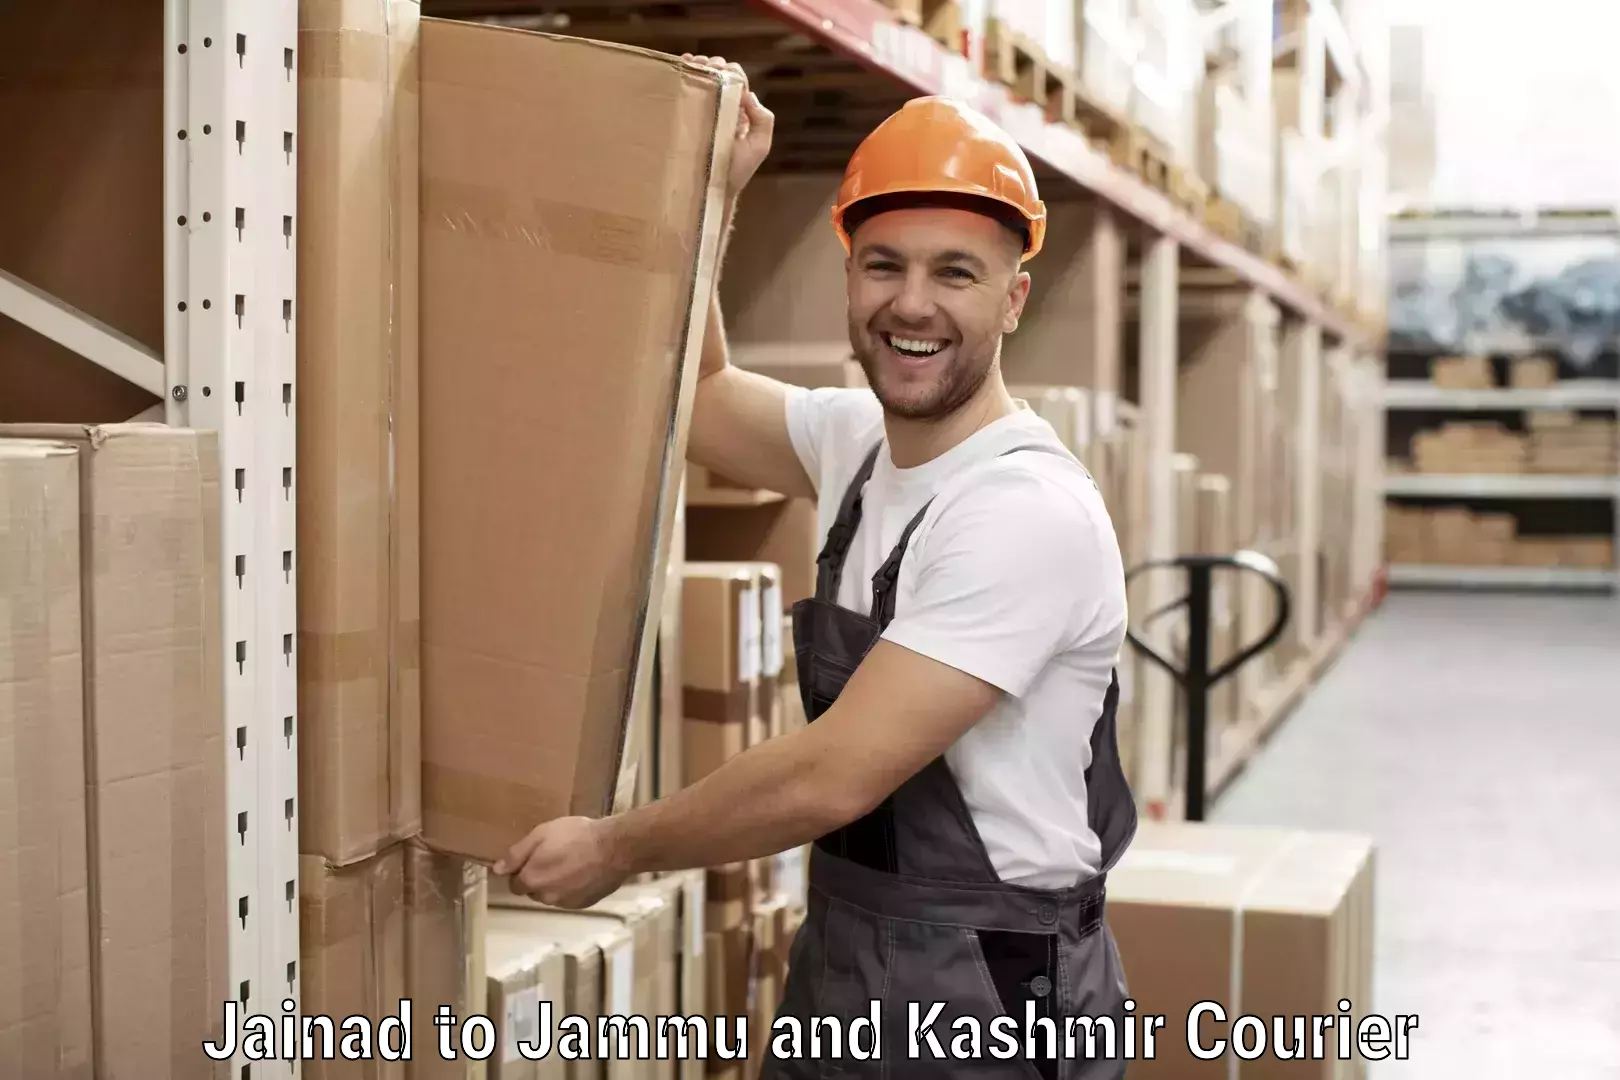 Flexible delivery scheduling Jainad to Jammu and Kashmir